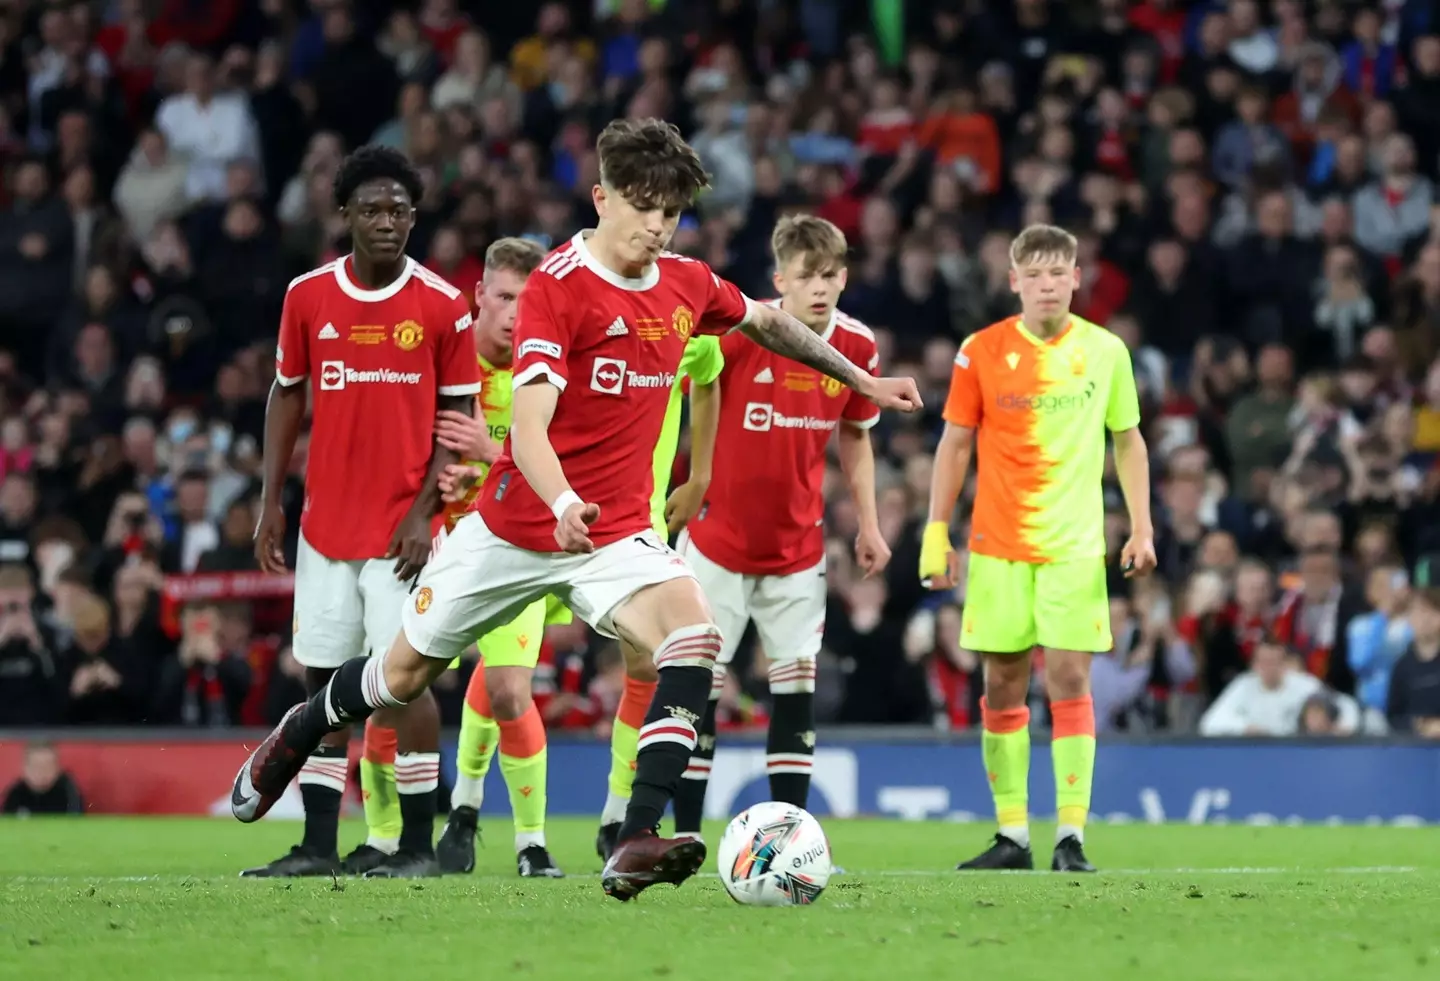 Alejandro Garnacho scores a penalty for Manchester United in the FA Youth Cup final. (Alamy)